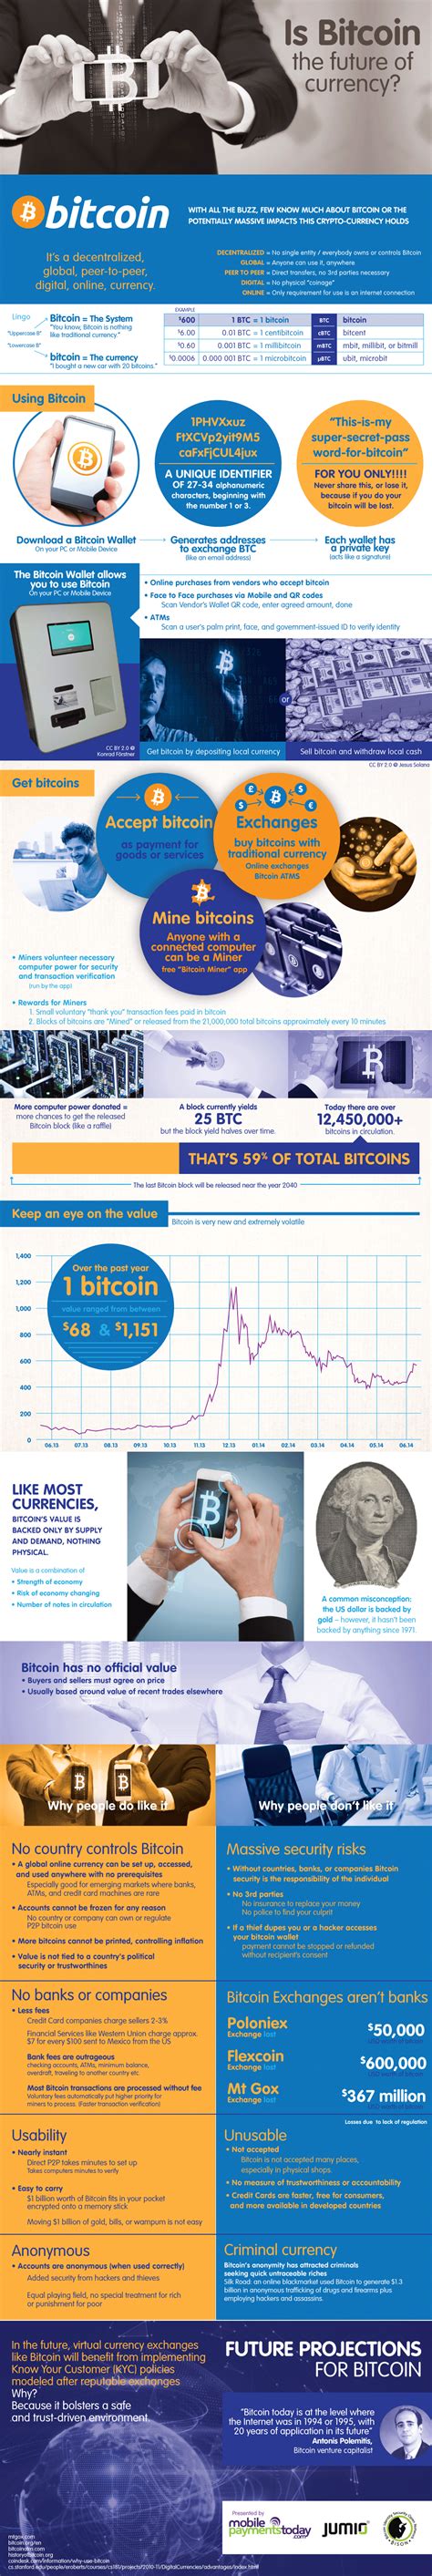 Table of contents hide 4. Is Bitcoin the Future of Currency? #infographic - Visualistan